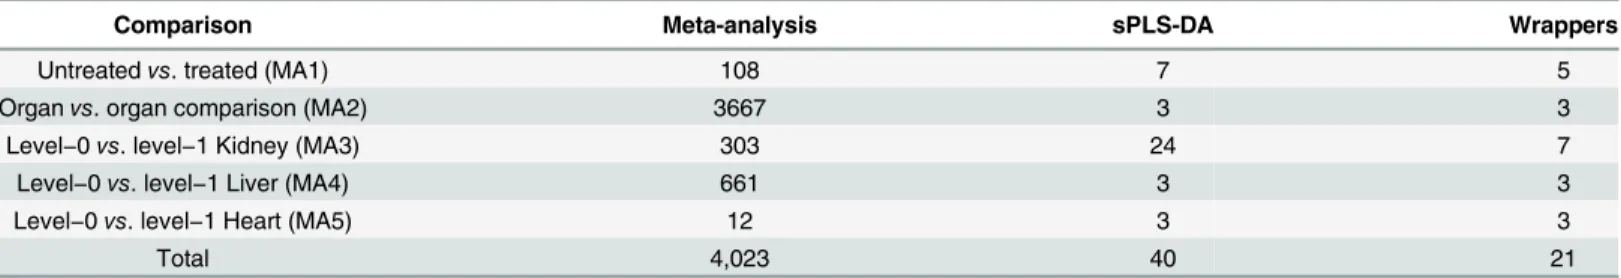 Table 1. Number of selected genes after meta-analysis, sPLS-DA, and wrapper approaches for all five meta-analysis comparisons.